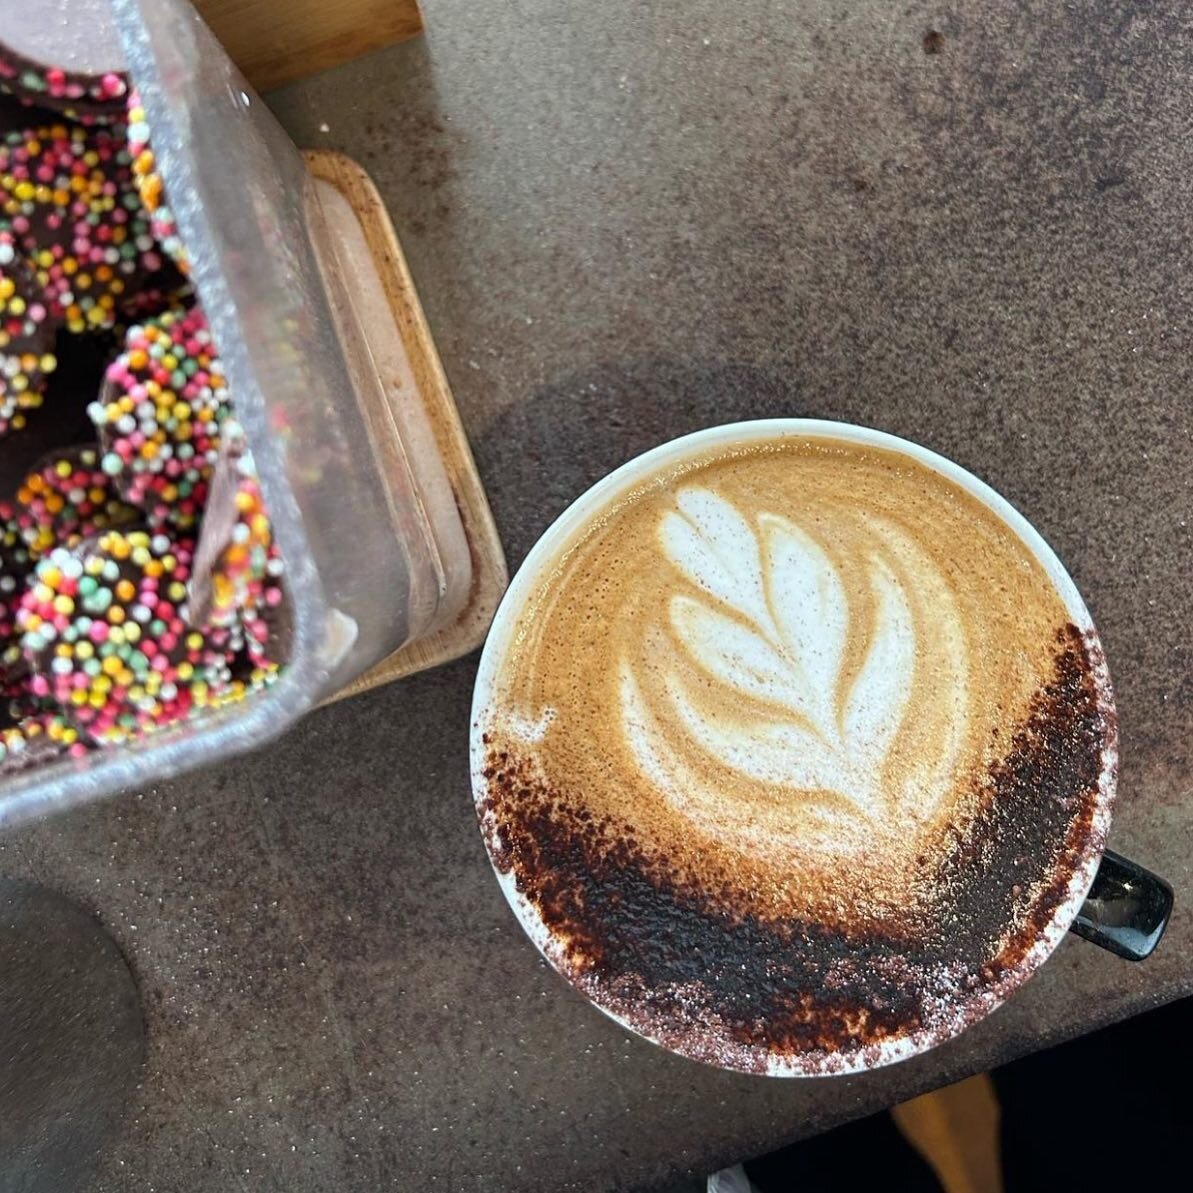 Pouring our way into the weekend 🤤 #goodbean
📸: @goodbeanmooloolaba